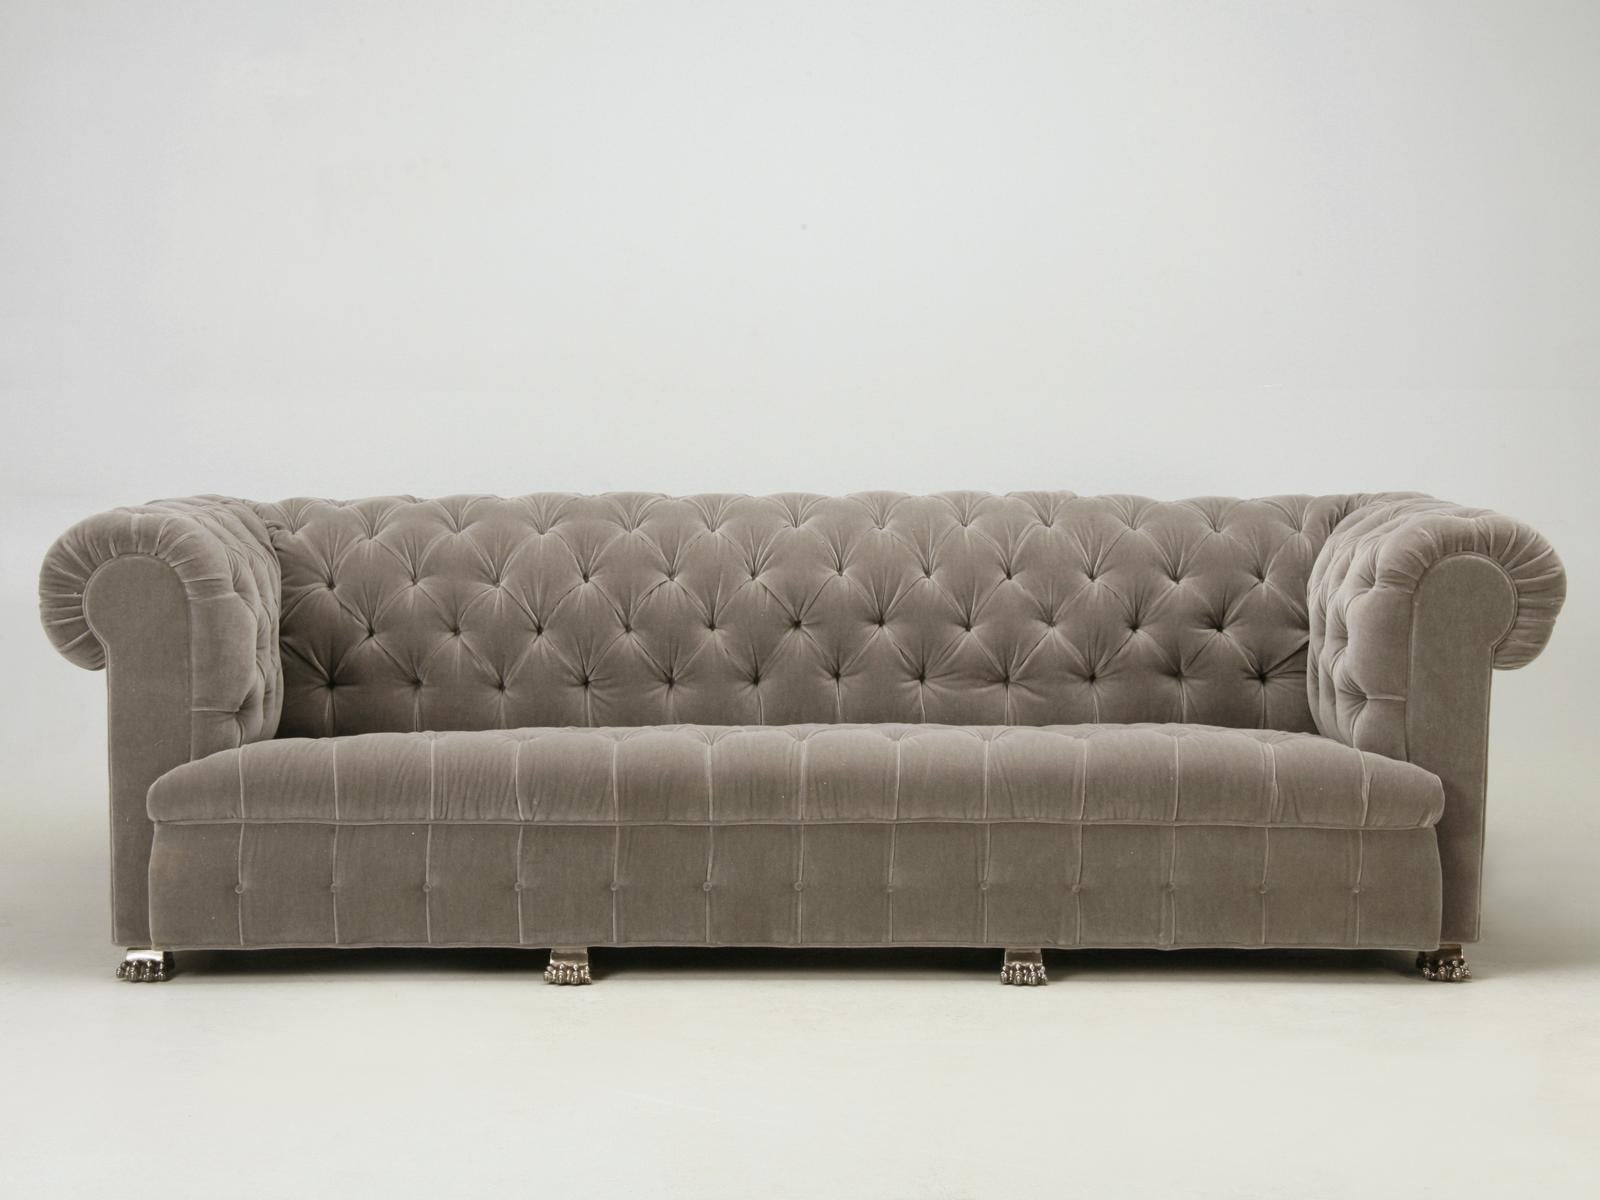 Custom built, classic Chesterfield designed sofa with nickel-plated solid bronze feet that give it a bit of a French twist. We just upholstered this sofa in a soft grey 100% wool mohair, all 20 yards of her. The frame is made from thick solid maple